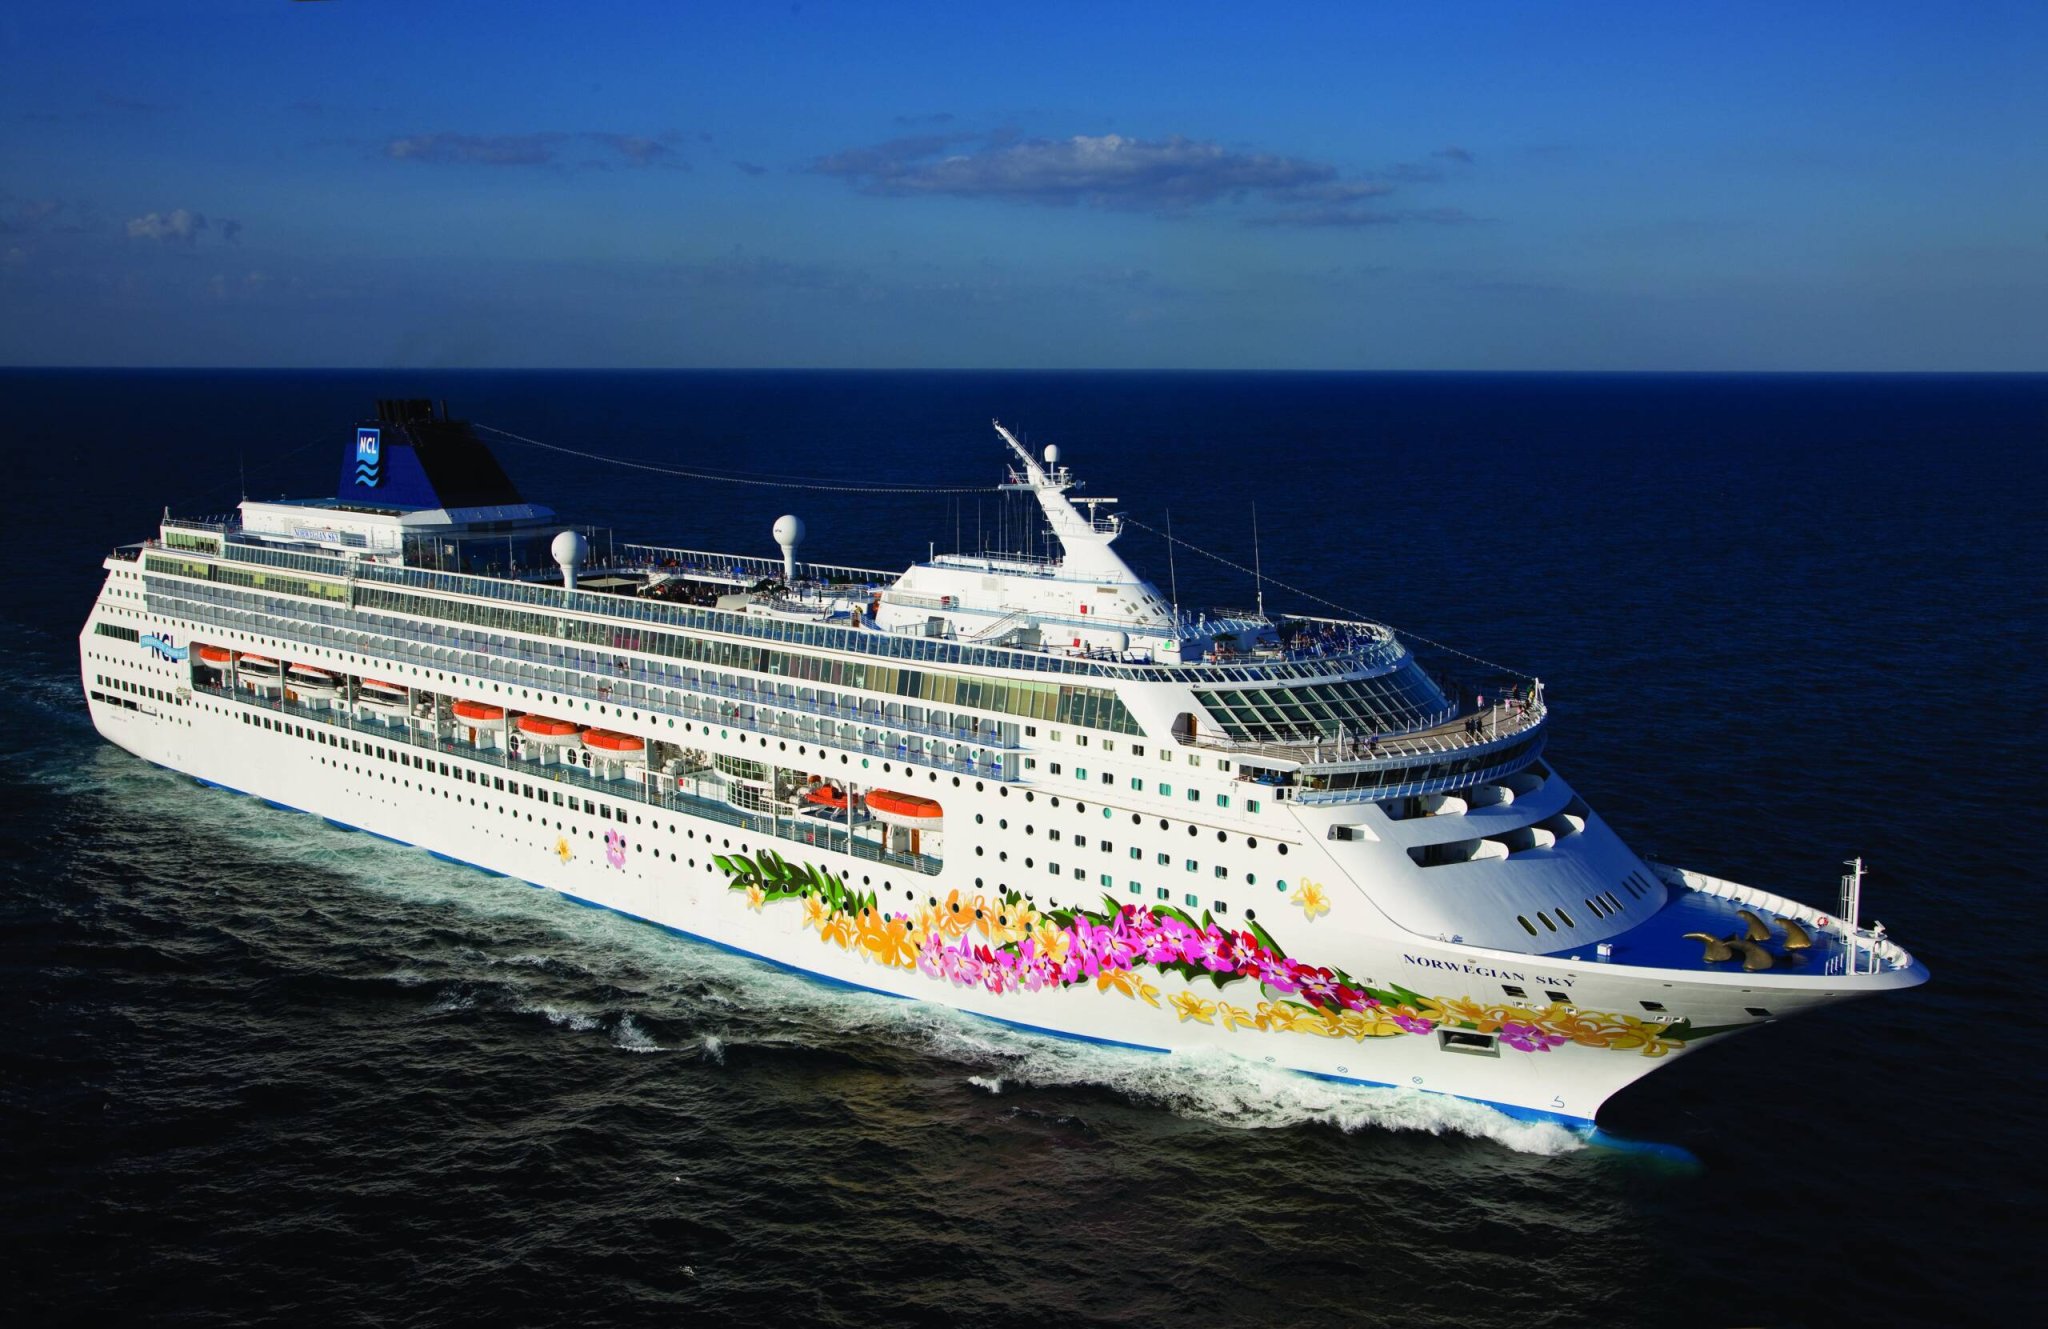 Norwegian Cruise Line outlines restart plans with sailings from Jamaica, Dominican Republic, Greece